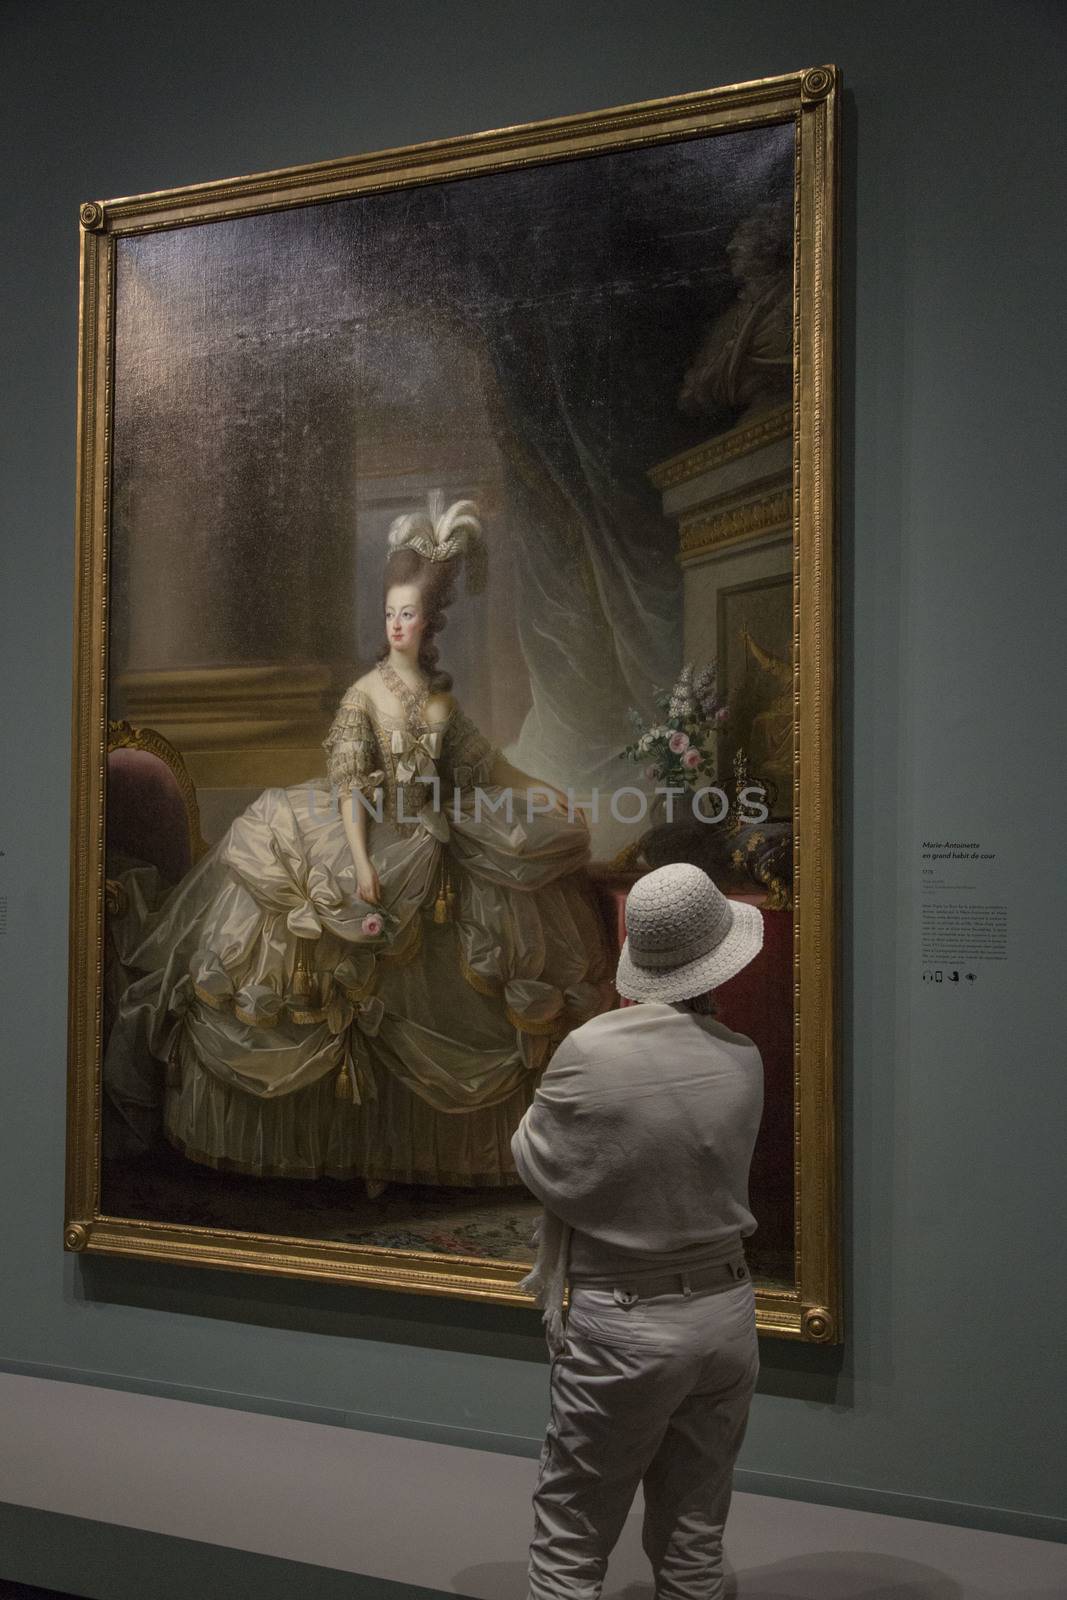 FRANCE, Paris: A woman watches a portrait of �lisabeth Louise Vig�e Le Brun in Le Grand Palais, in Paris on September 21, 2015. �lisabeth Louise Vig�e Le Brun (1755-1842) is one of the greater portrait painter of her time. She was chosen to paint the very famous queen of France Marie-Antoinette. 